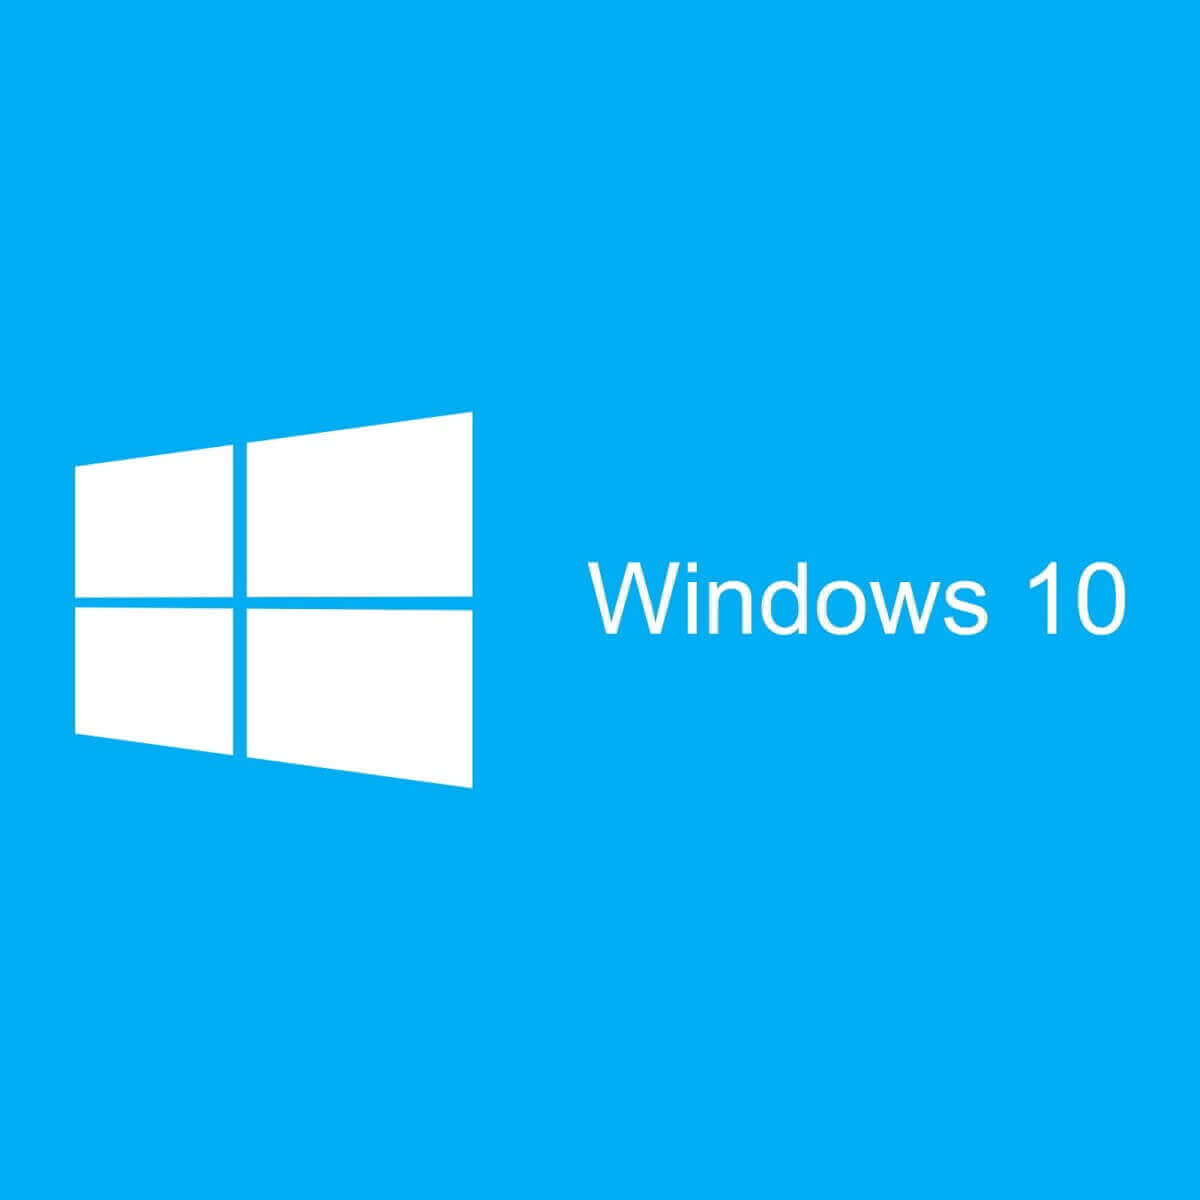 How to take ownership of a file or a folder on Windows 10 step-by-step guide